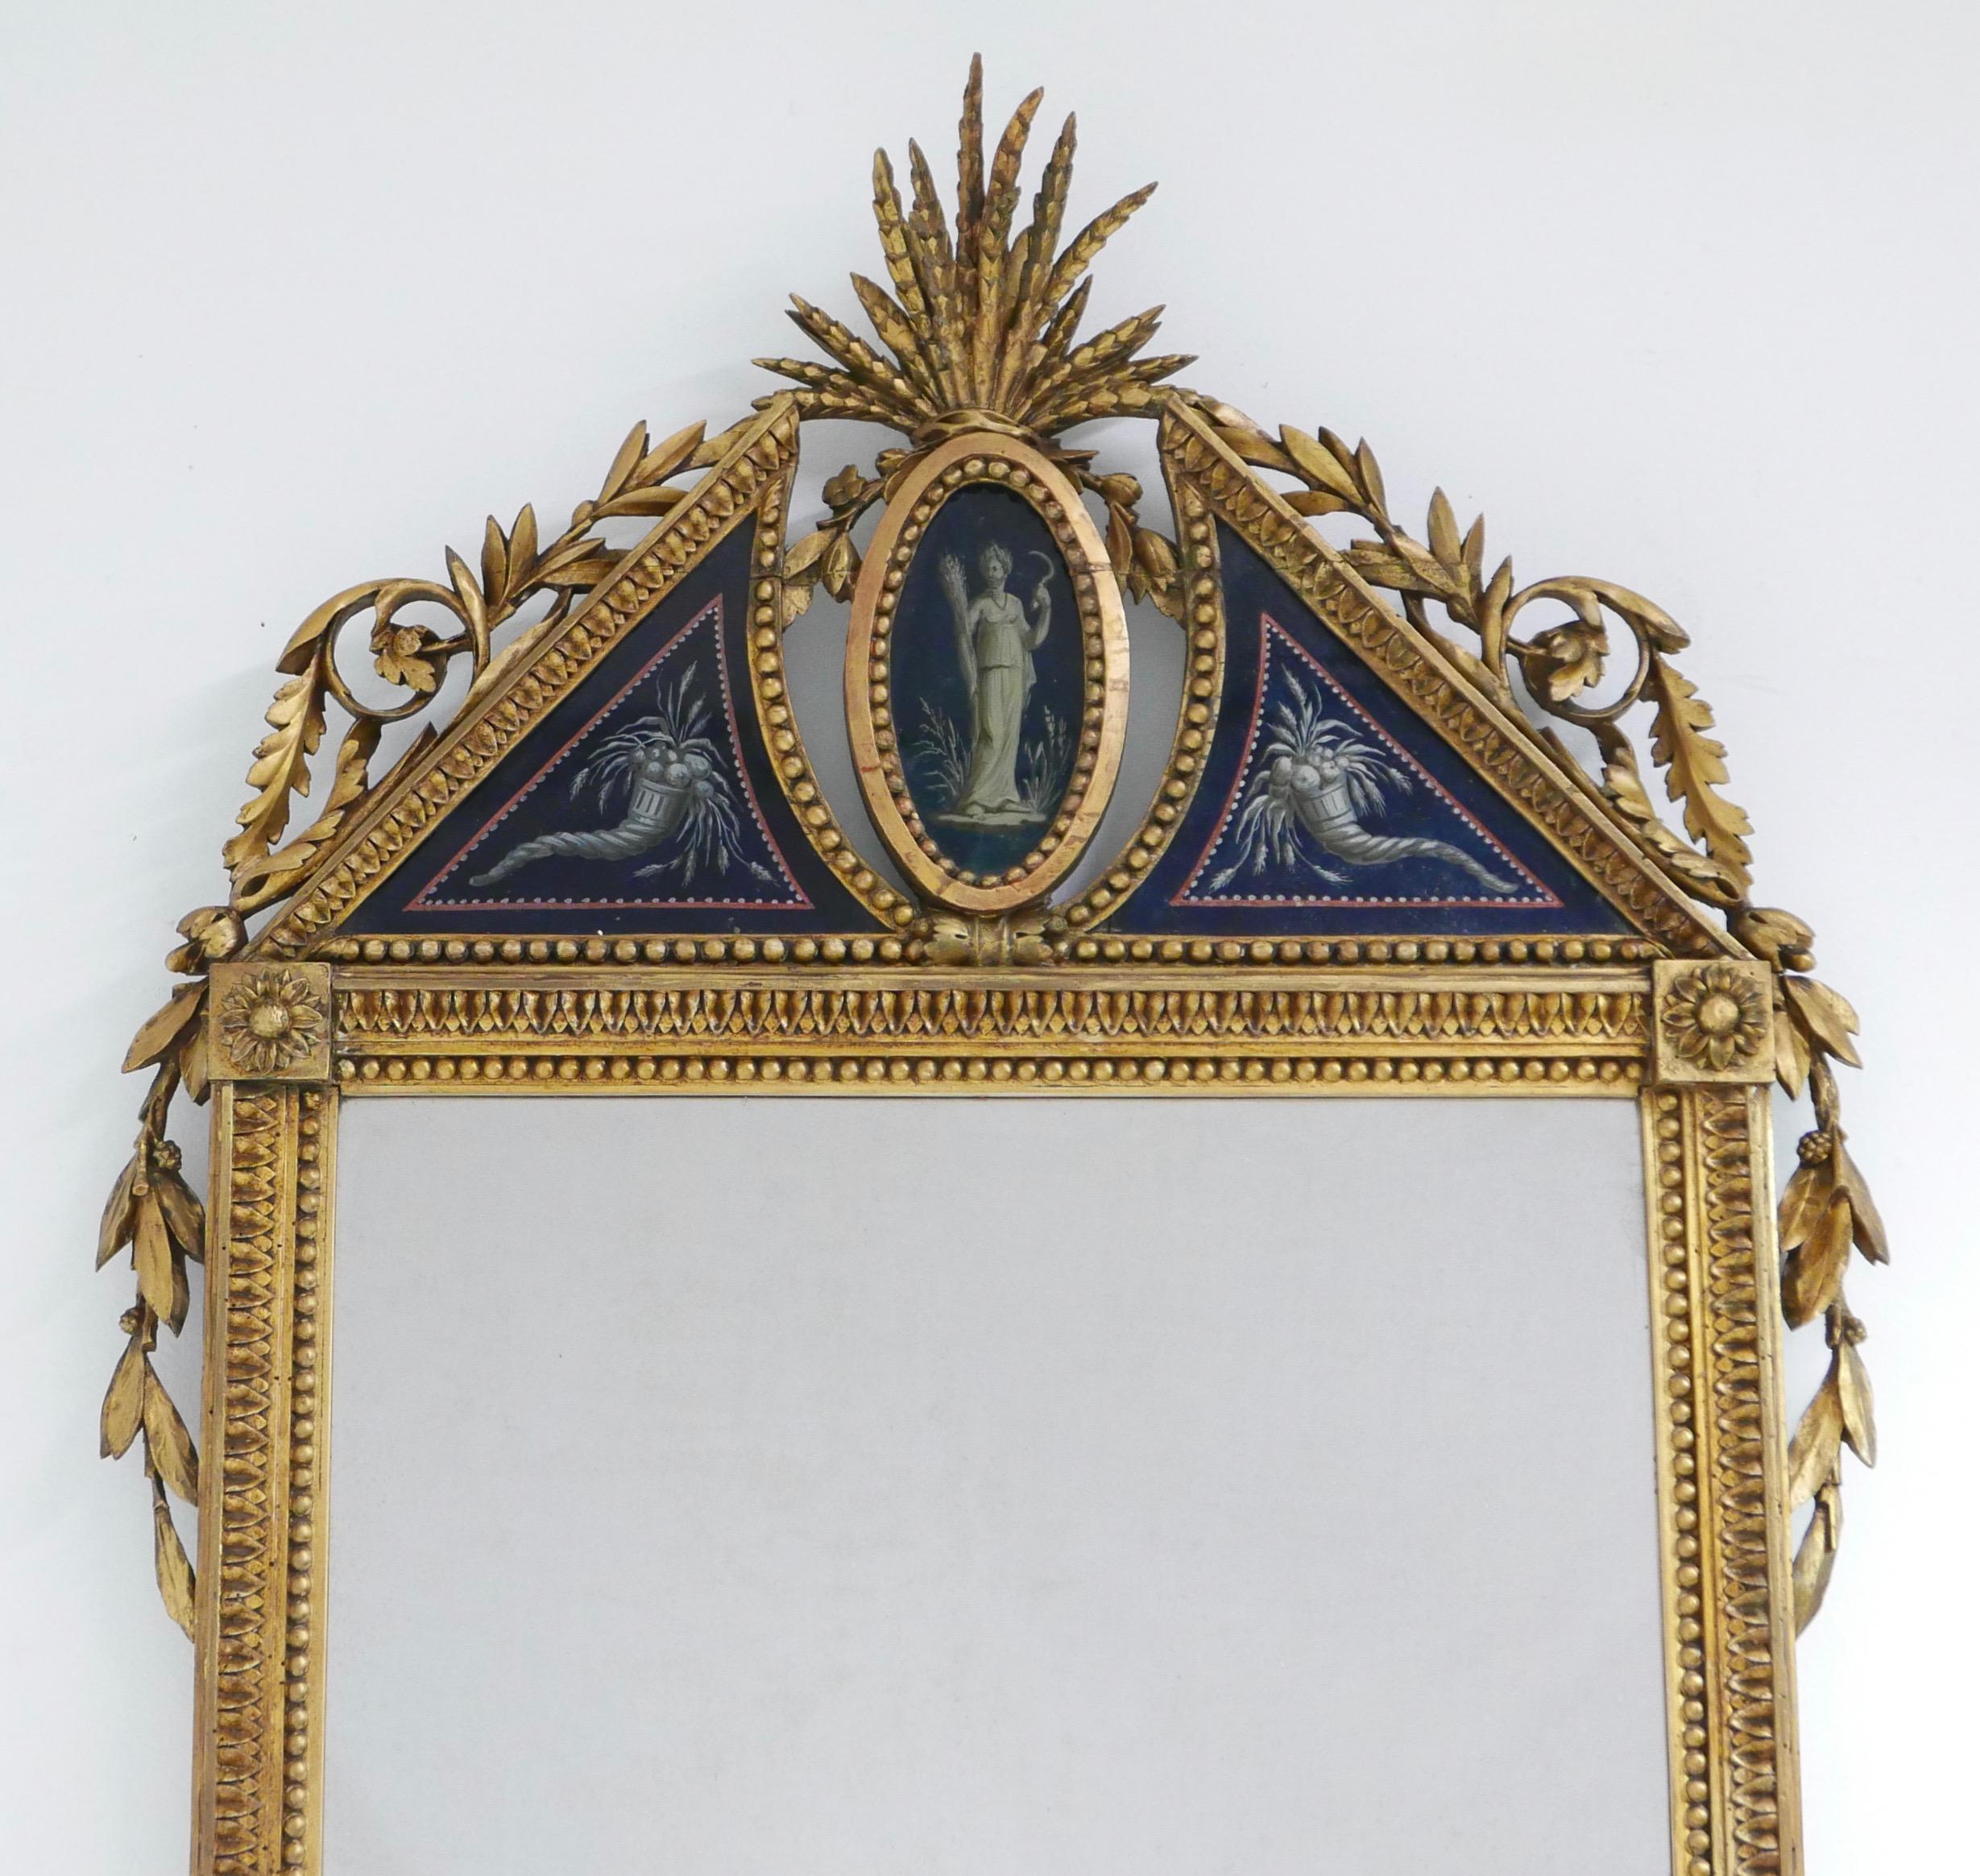 A stunning and intricately carved and gilded mirror with a crown of églomisé (reverse painted glass ) panels featuring the Greek goddess Demeter, flanked by a pair of cornucopias.
Demeter is the goddess of fertility, sacred law and the harvest, and